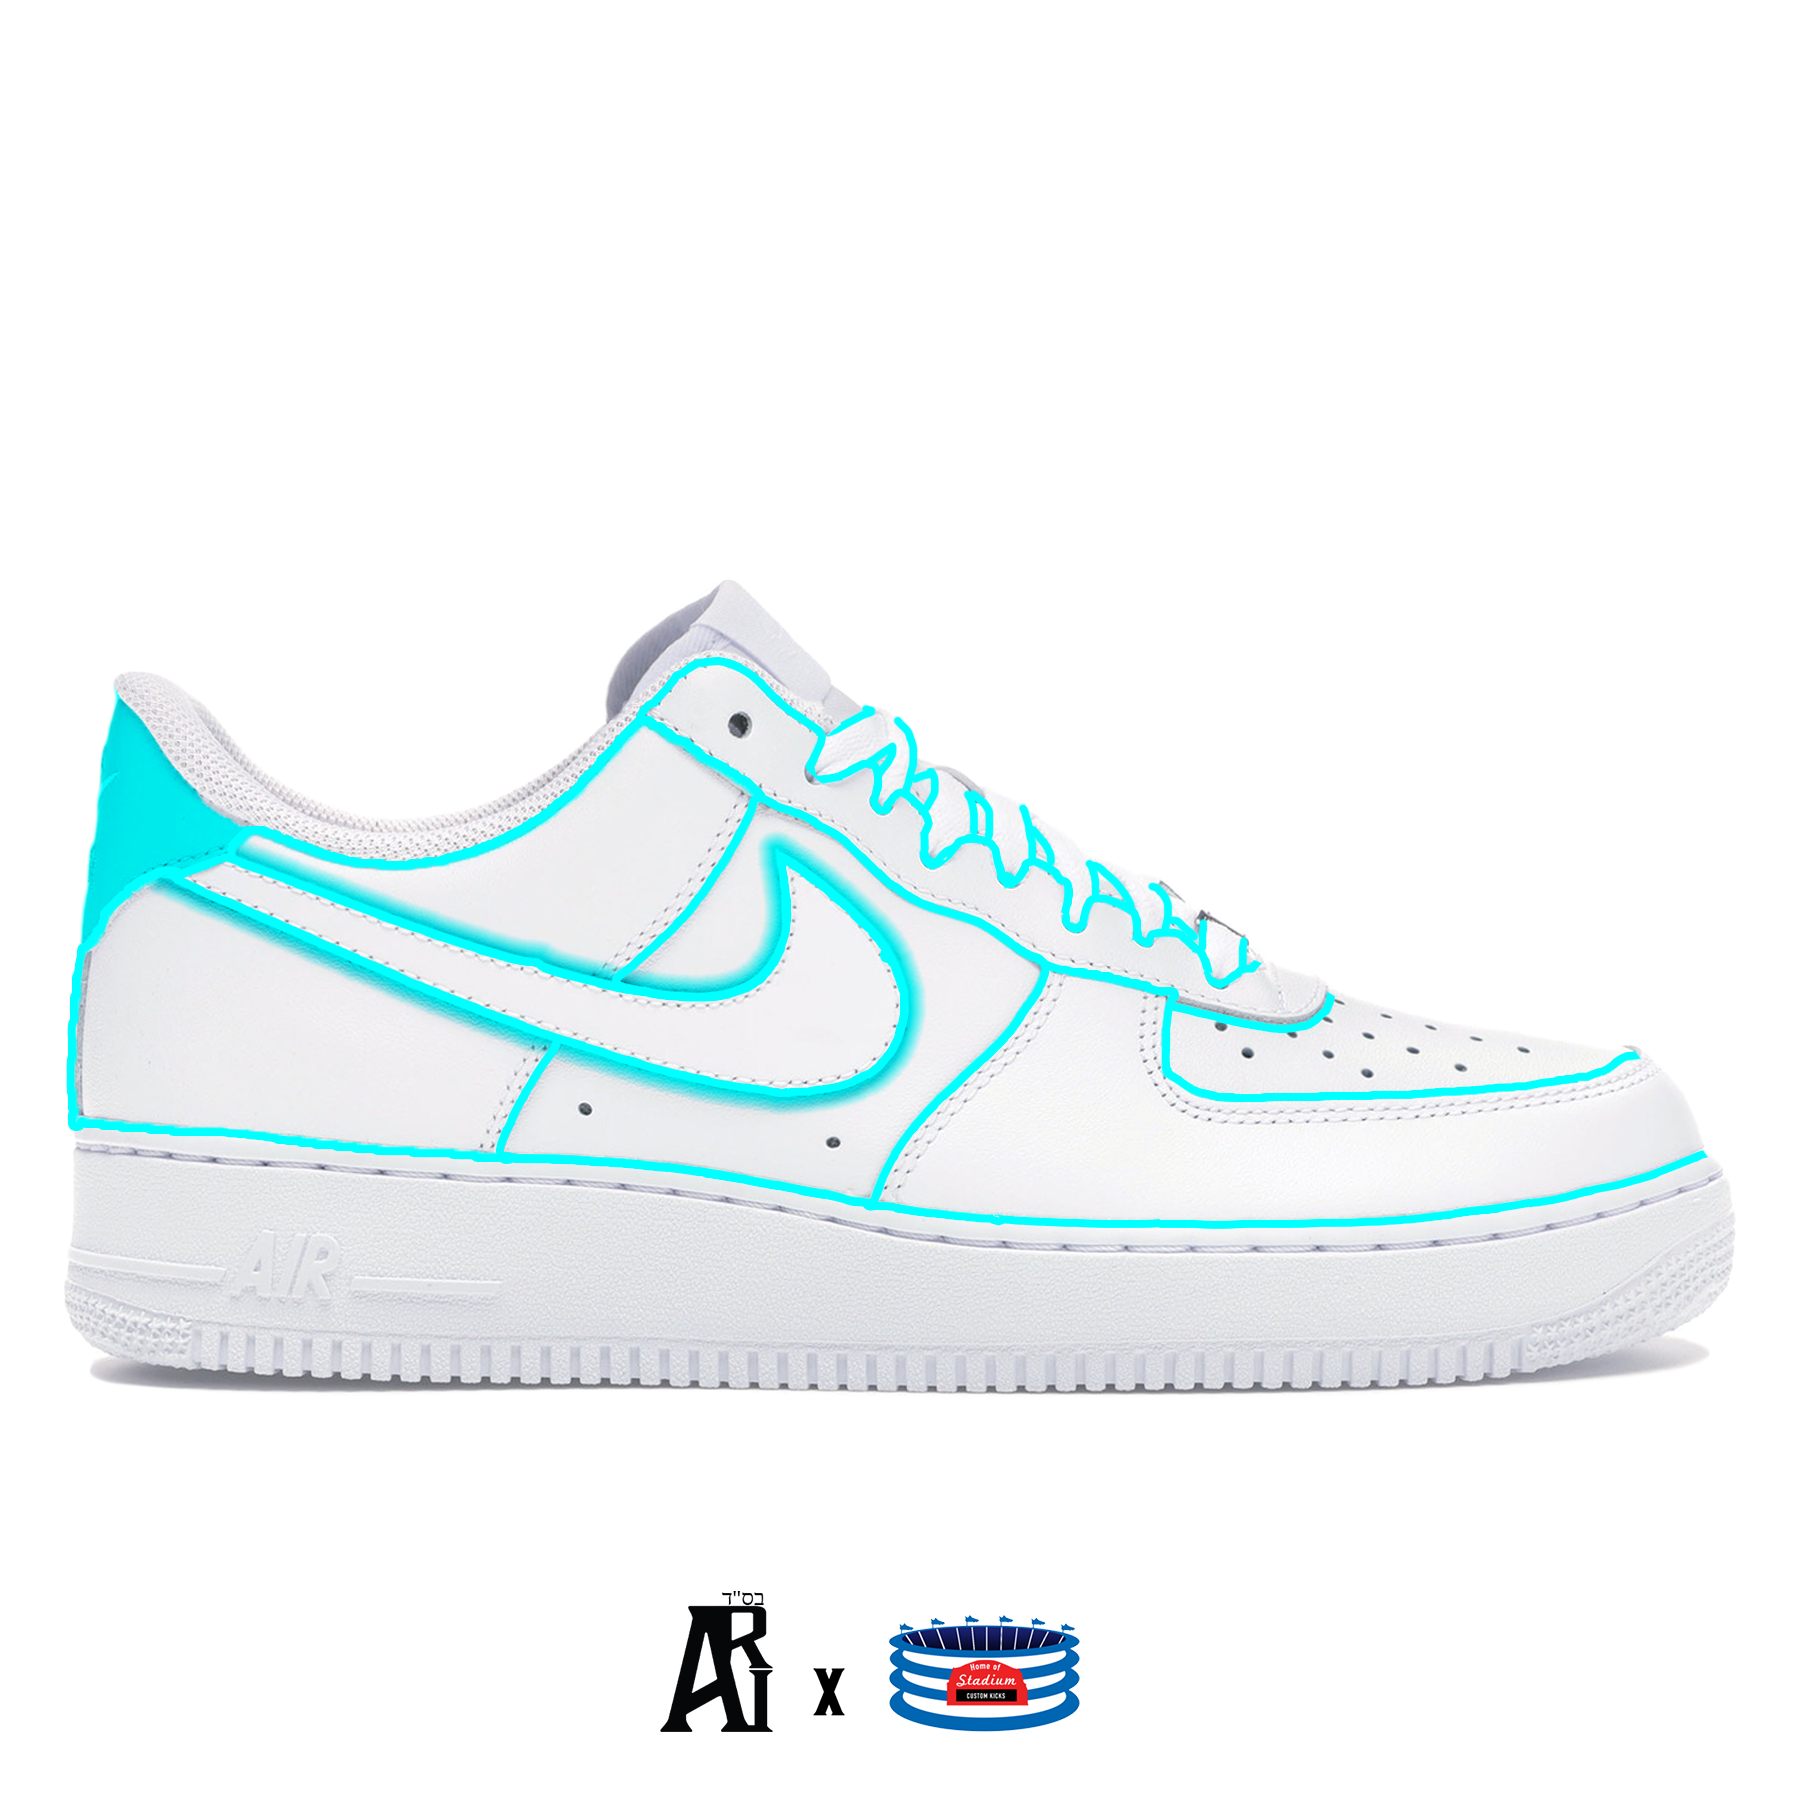 Nike Air Force 1 Black Neon Outline Custom Shoes Blue Green Yellow Pink All  Size